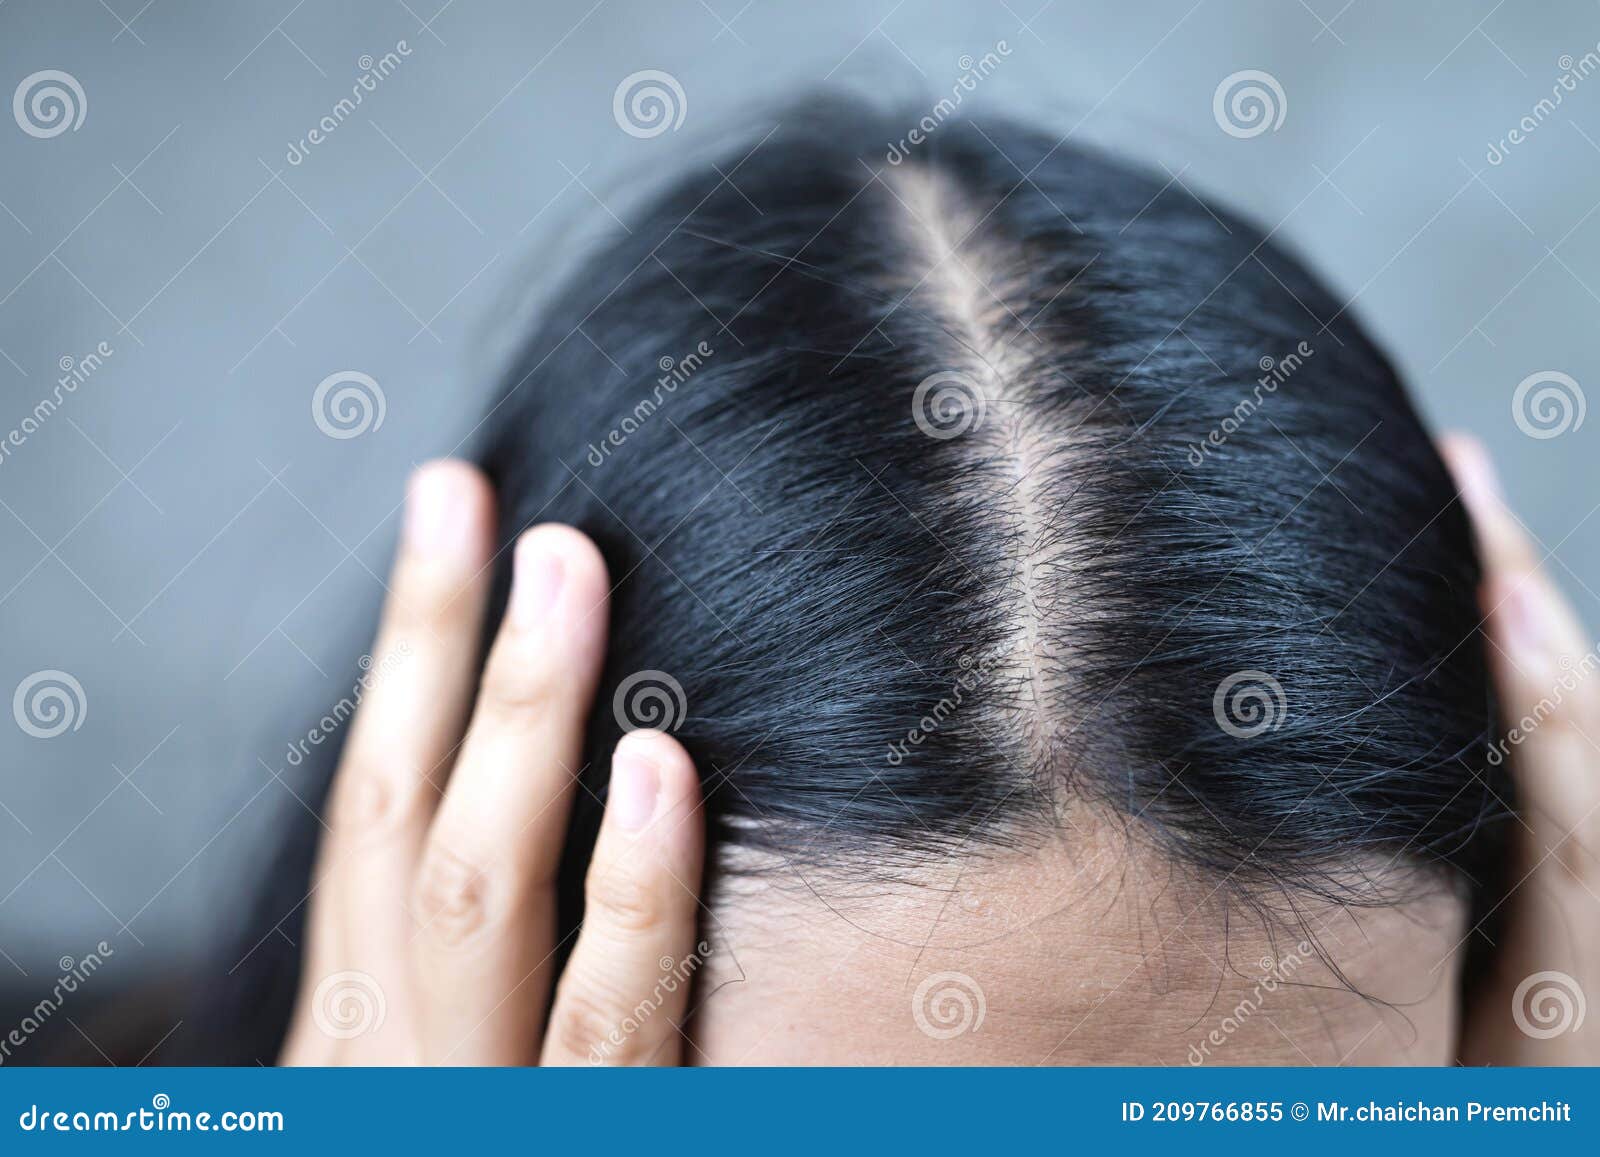 Scalp Problems  Causes Symptoms Types  How To Take Care